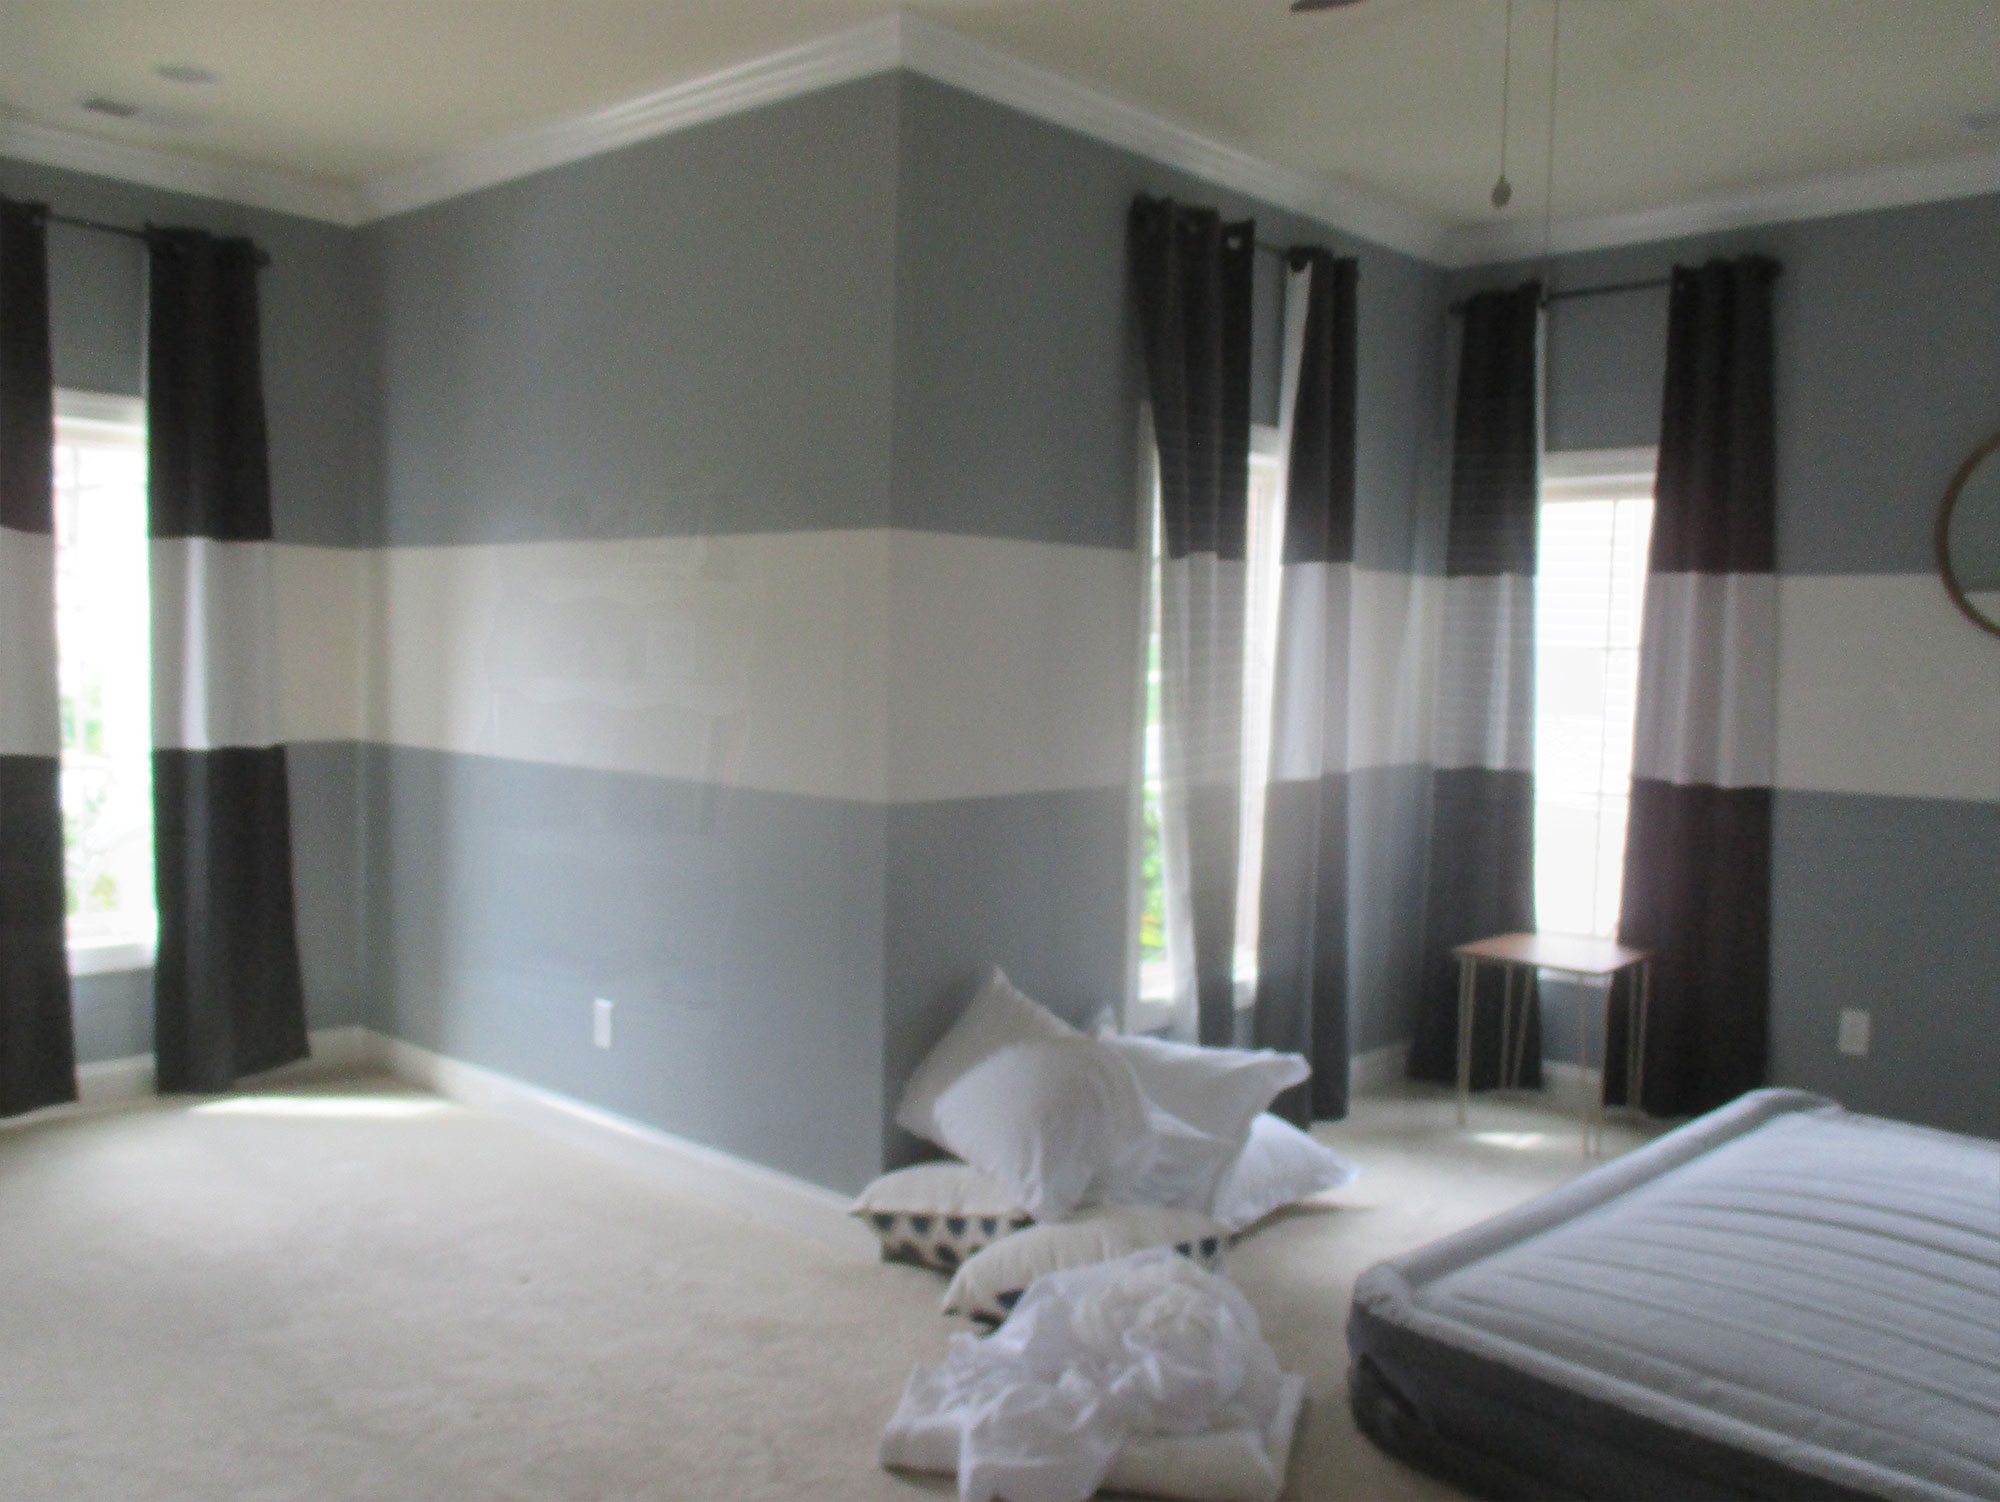 Bedroom Project in Waxhaw, NC Before